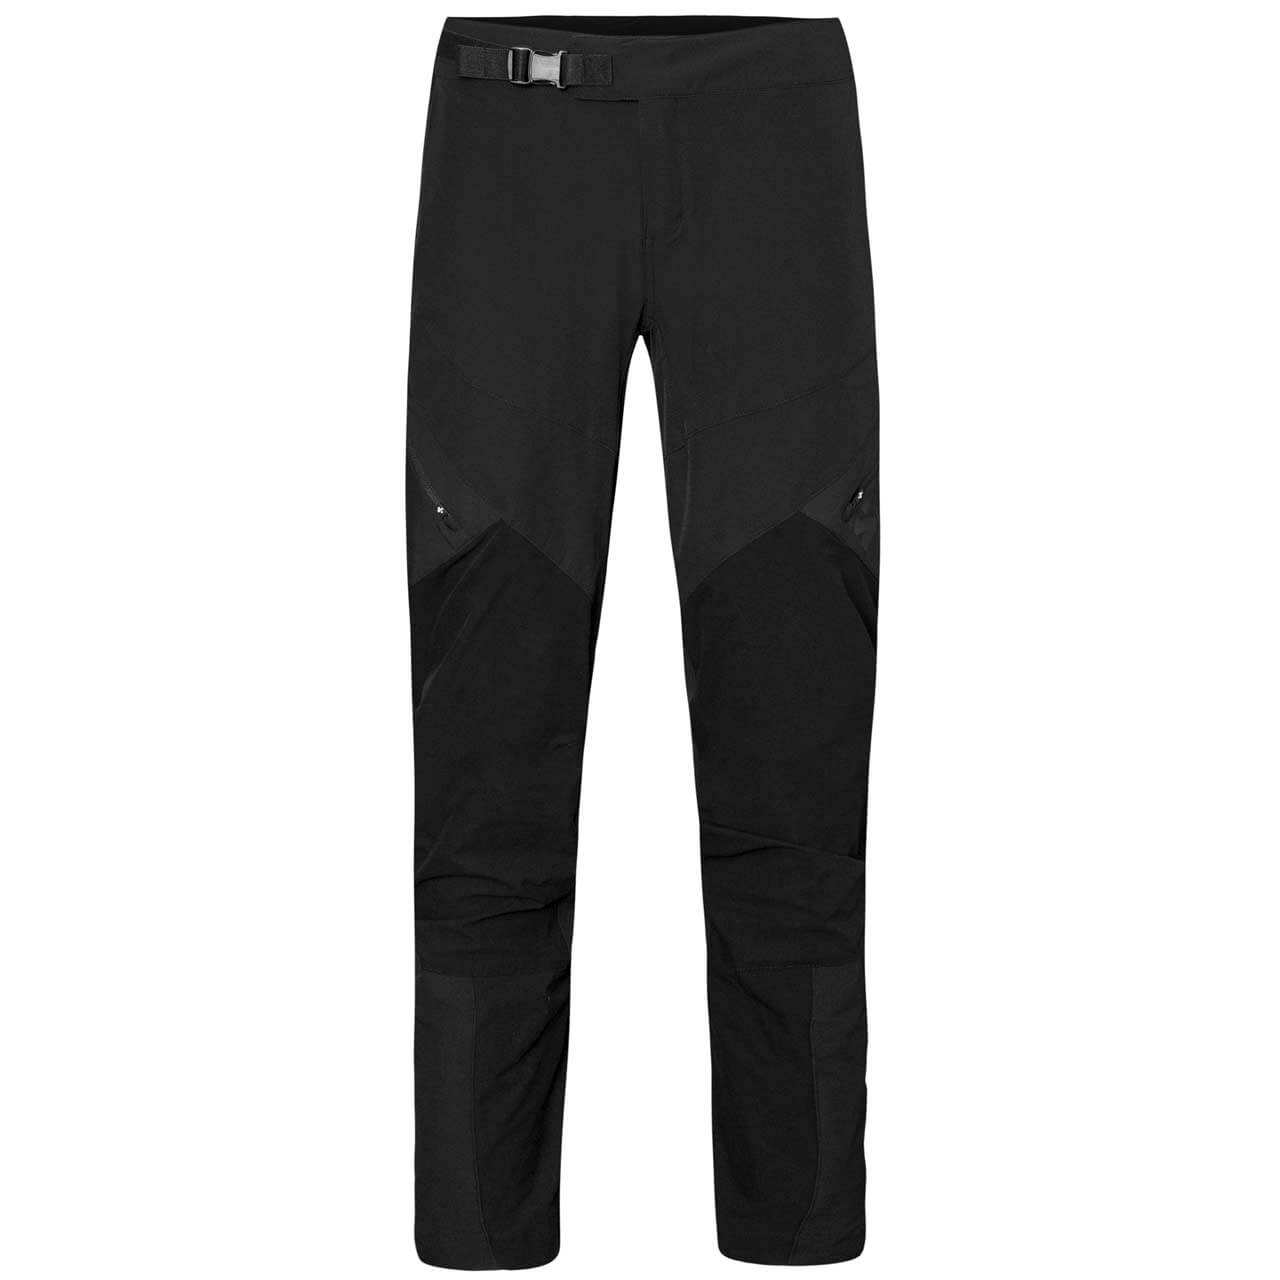 Sweet Protection Hunter Pants - Black, L von Sweet Protection